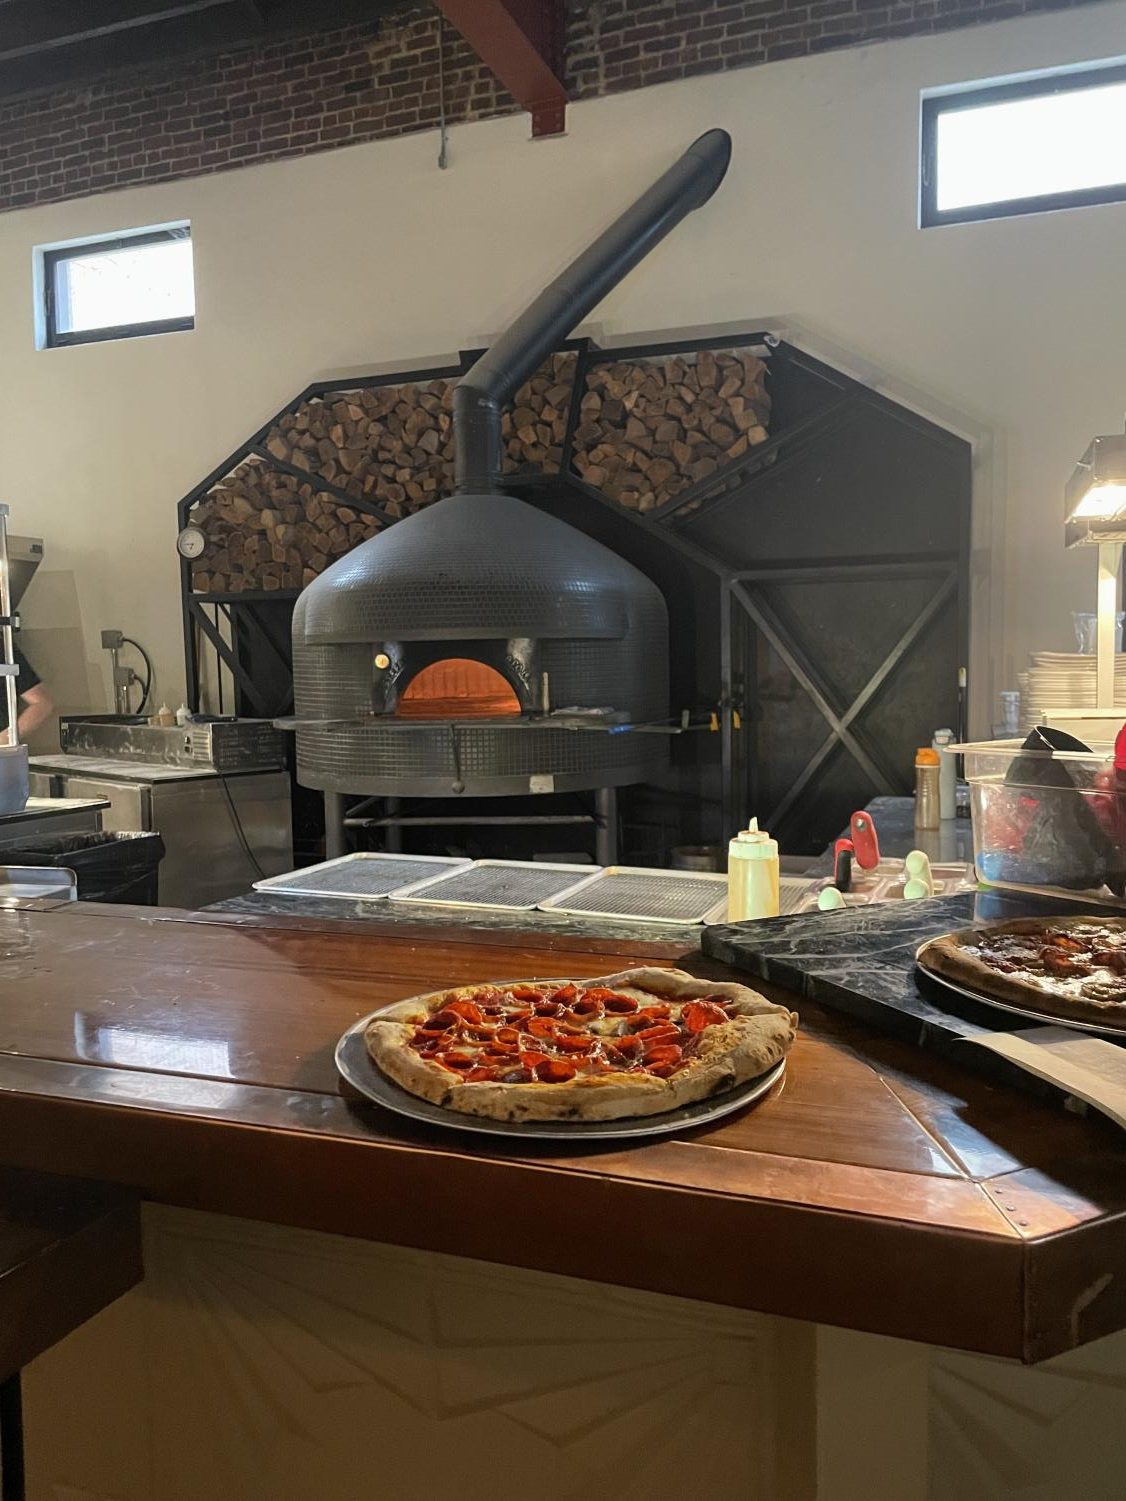 Modern kitchen. The delicious pizza comes baked fresh out of the oven. This delicious pizza was waiting to be taken to a table.